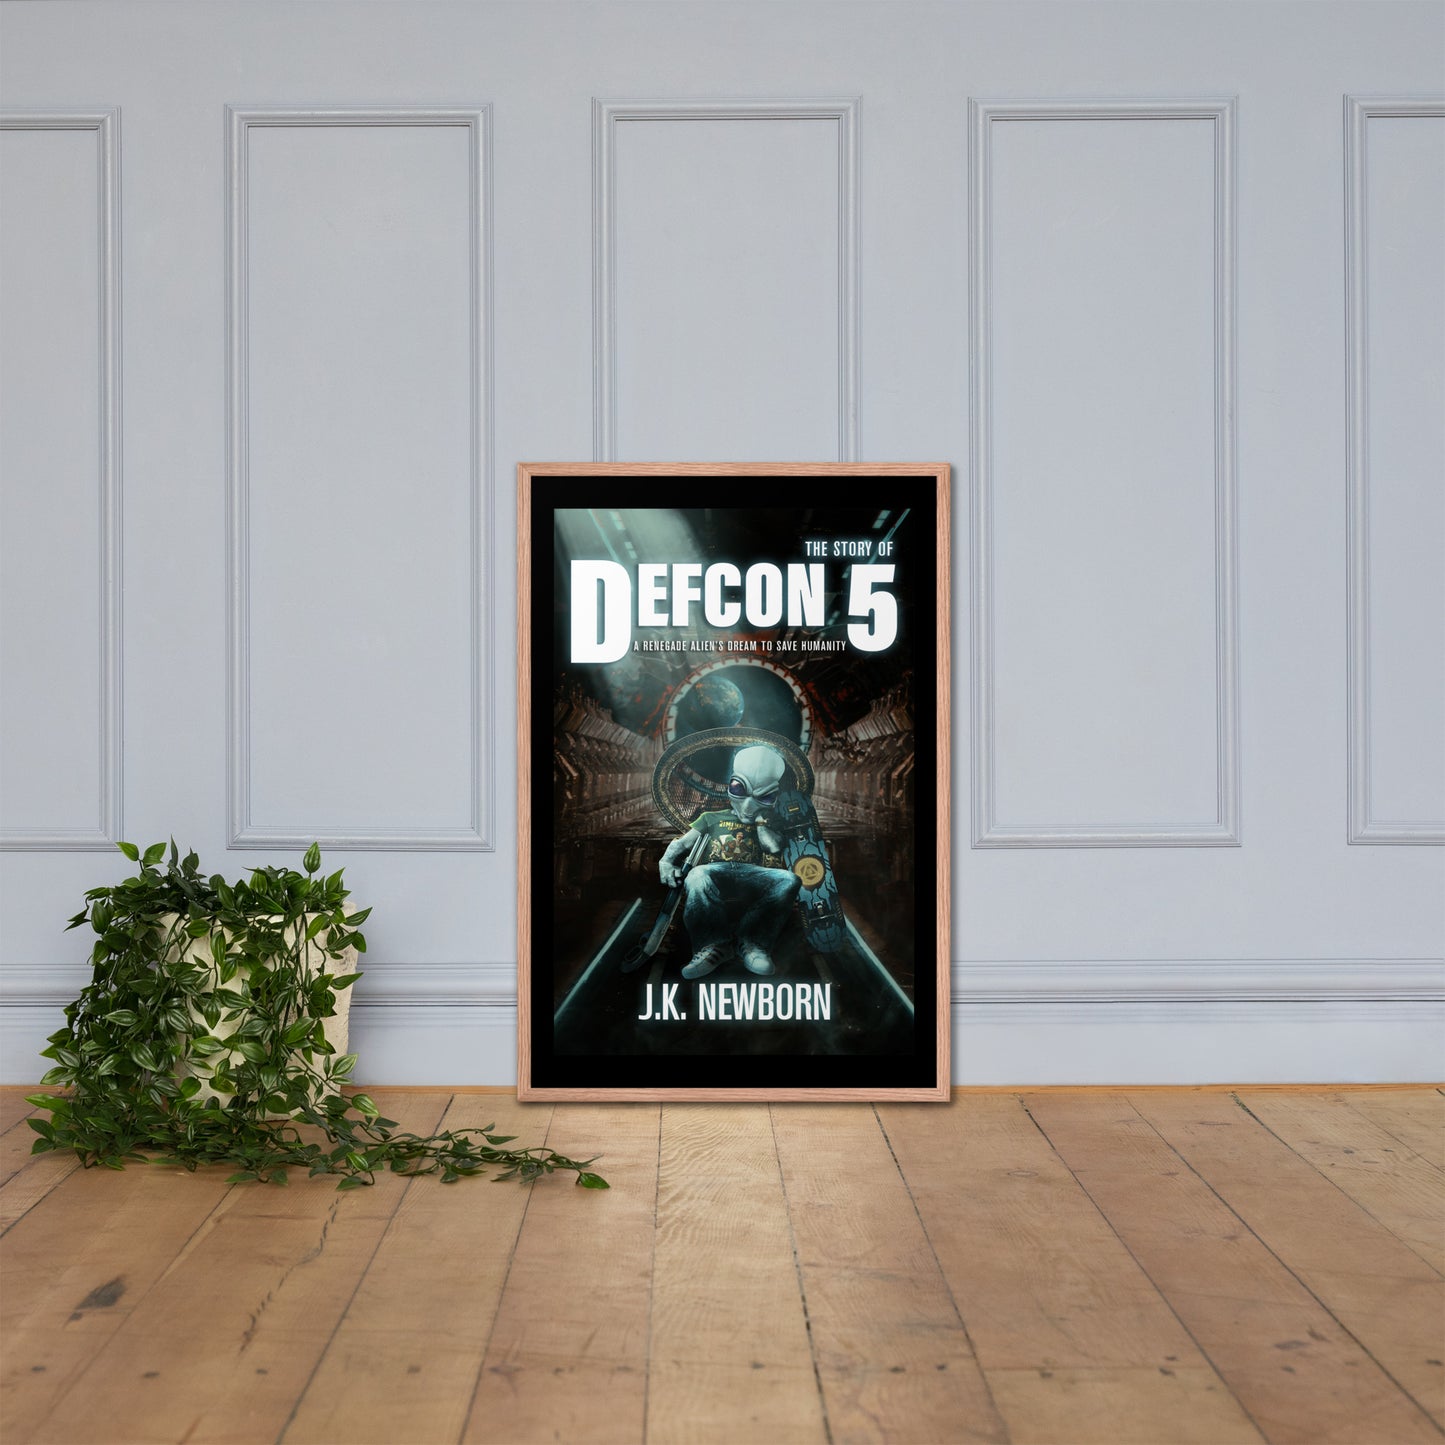 Defcon 5 framed, high quality book cover poster